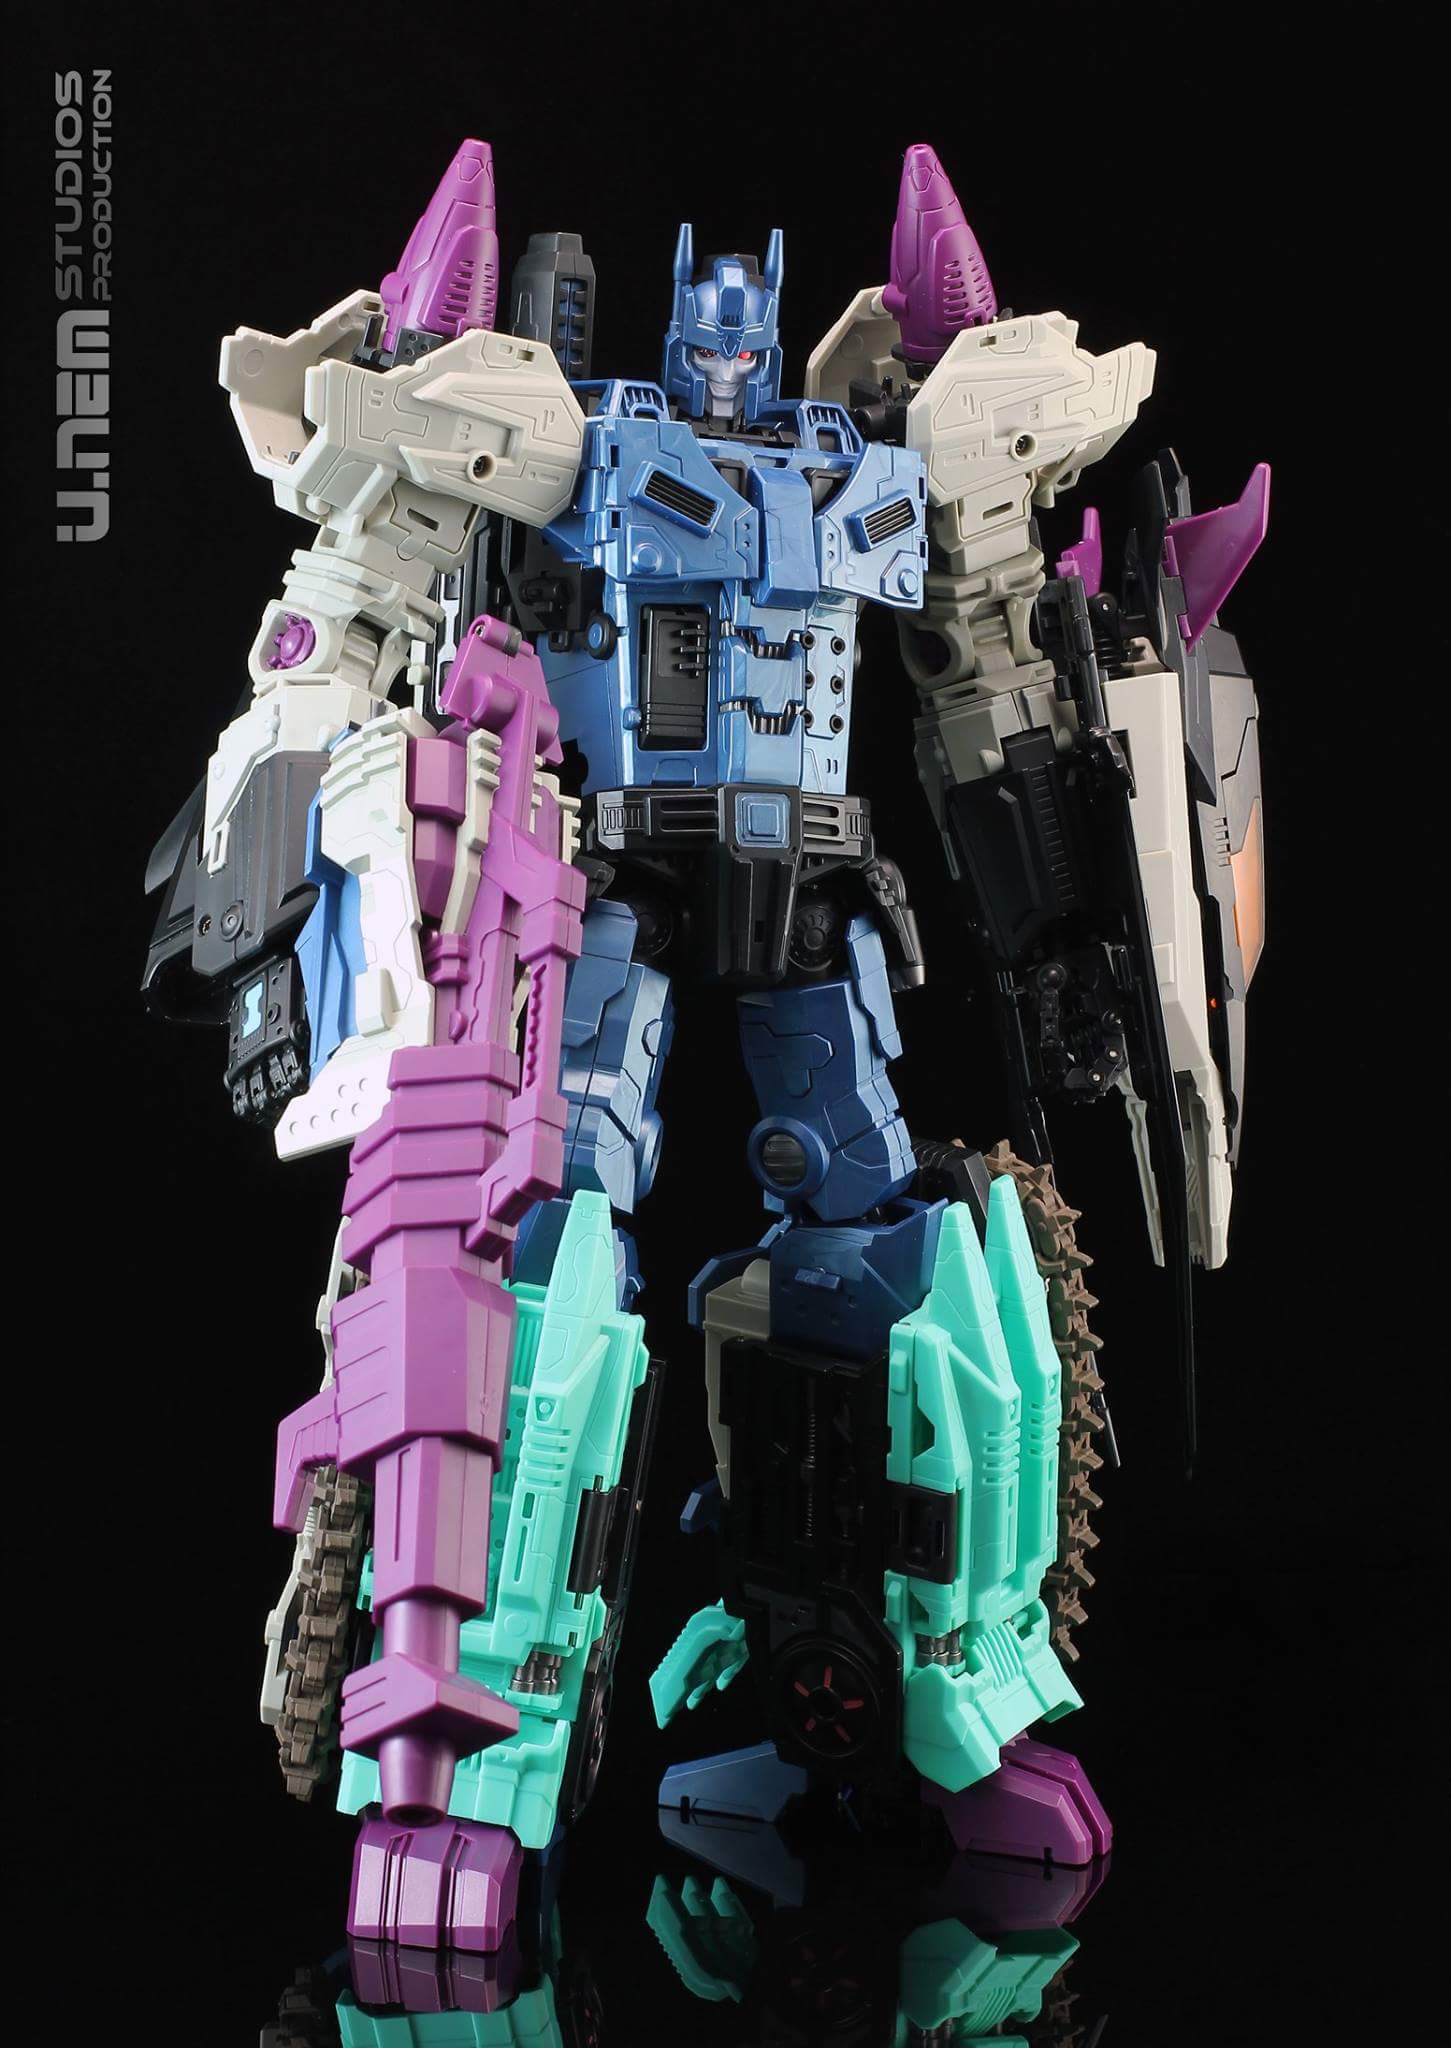 [Mastermind Creations] Produit Tiers - R-17 Carnifex - aka Overlord (TF Masterforce) - Page 2 JMjBl8Tj